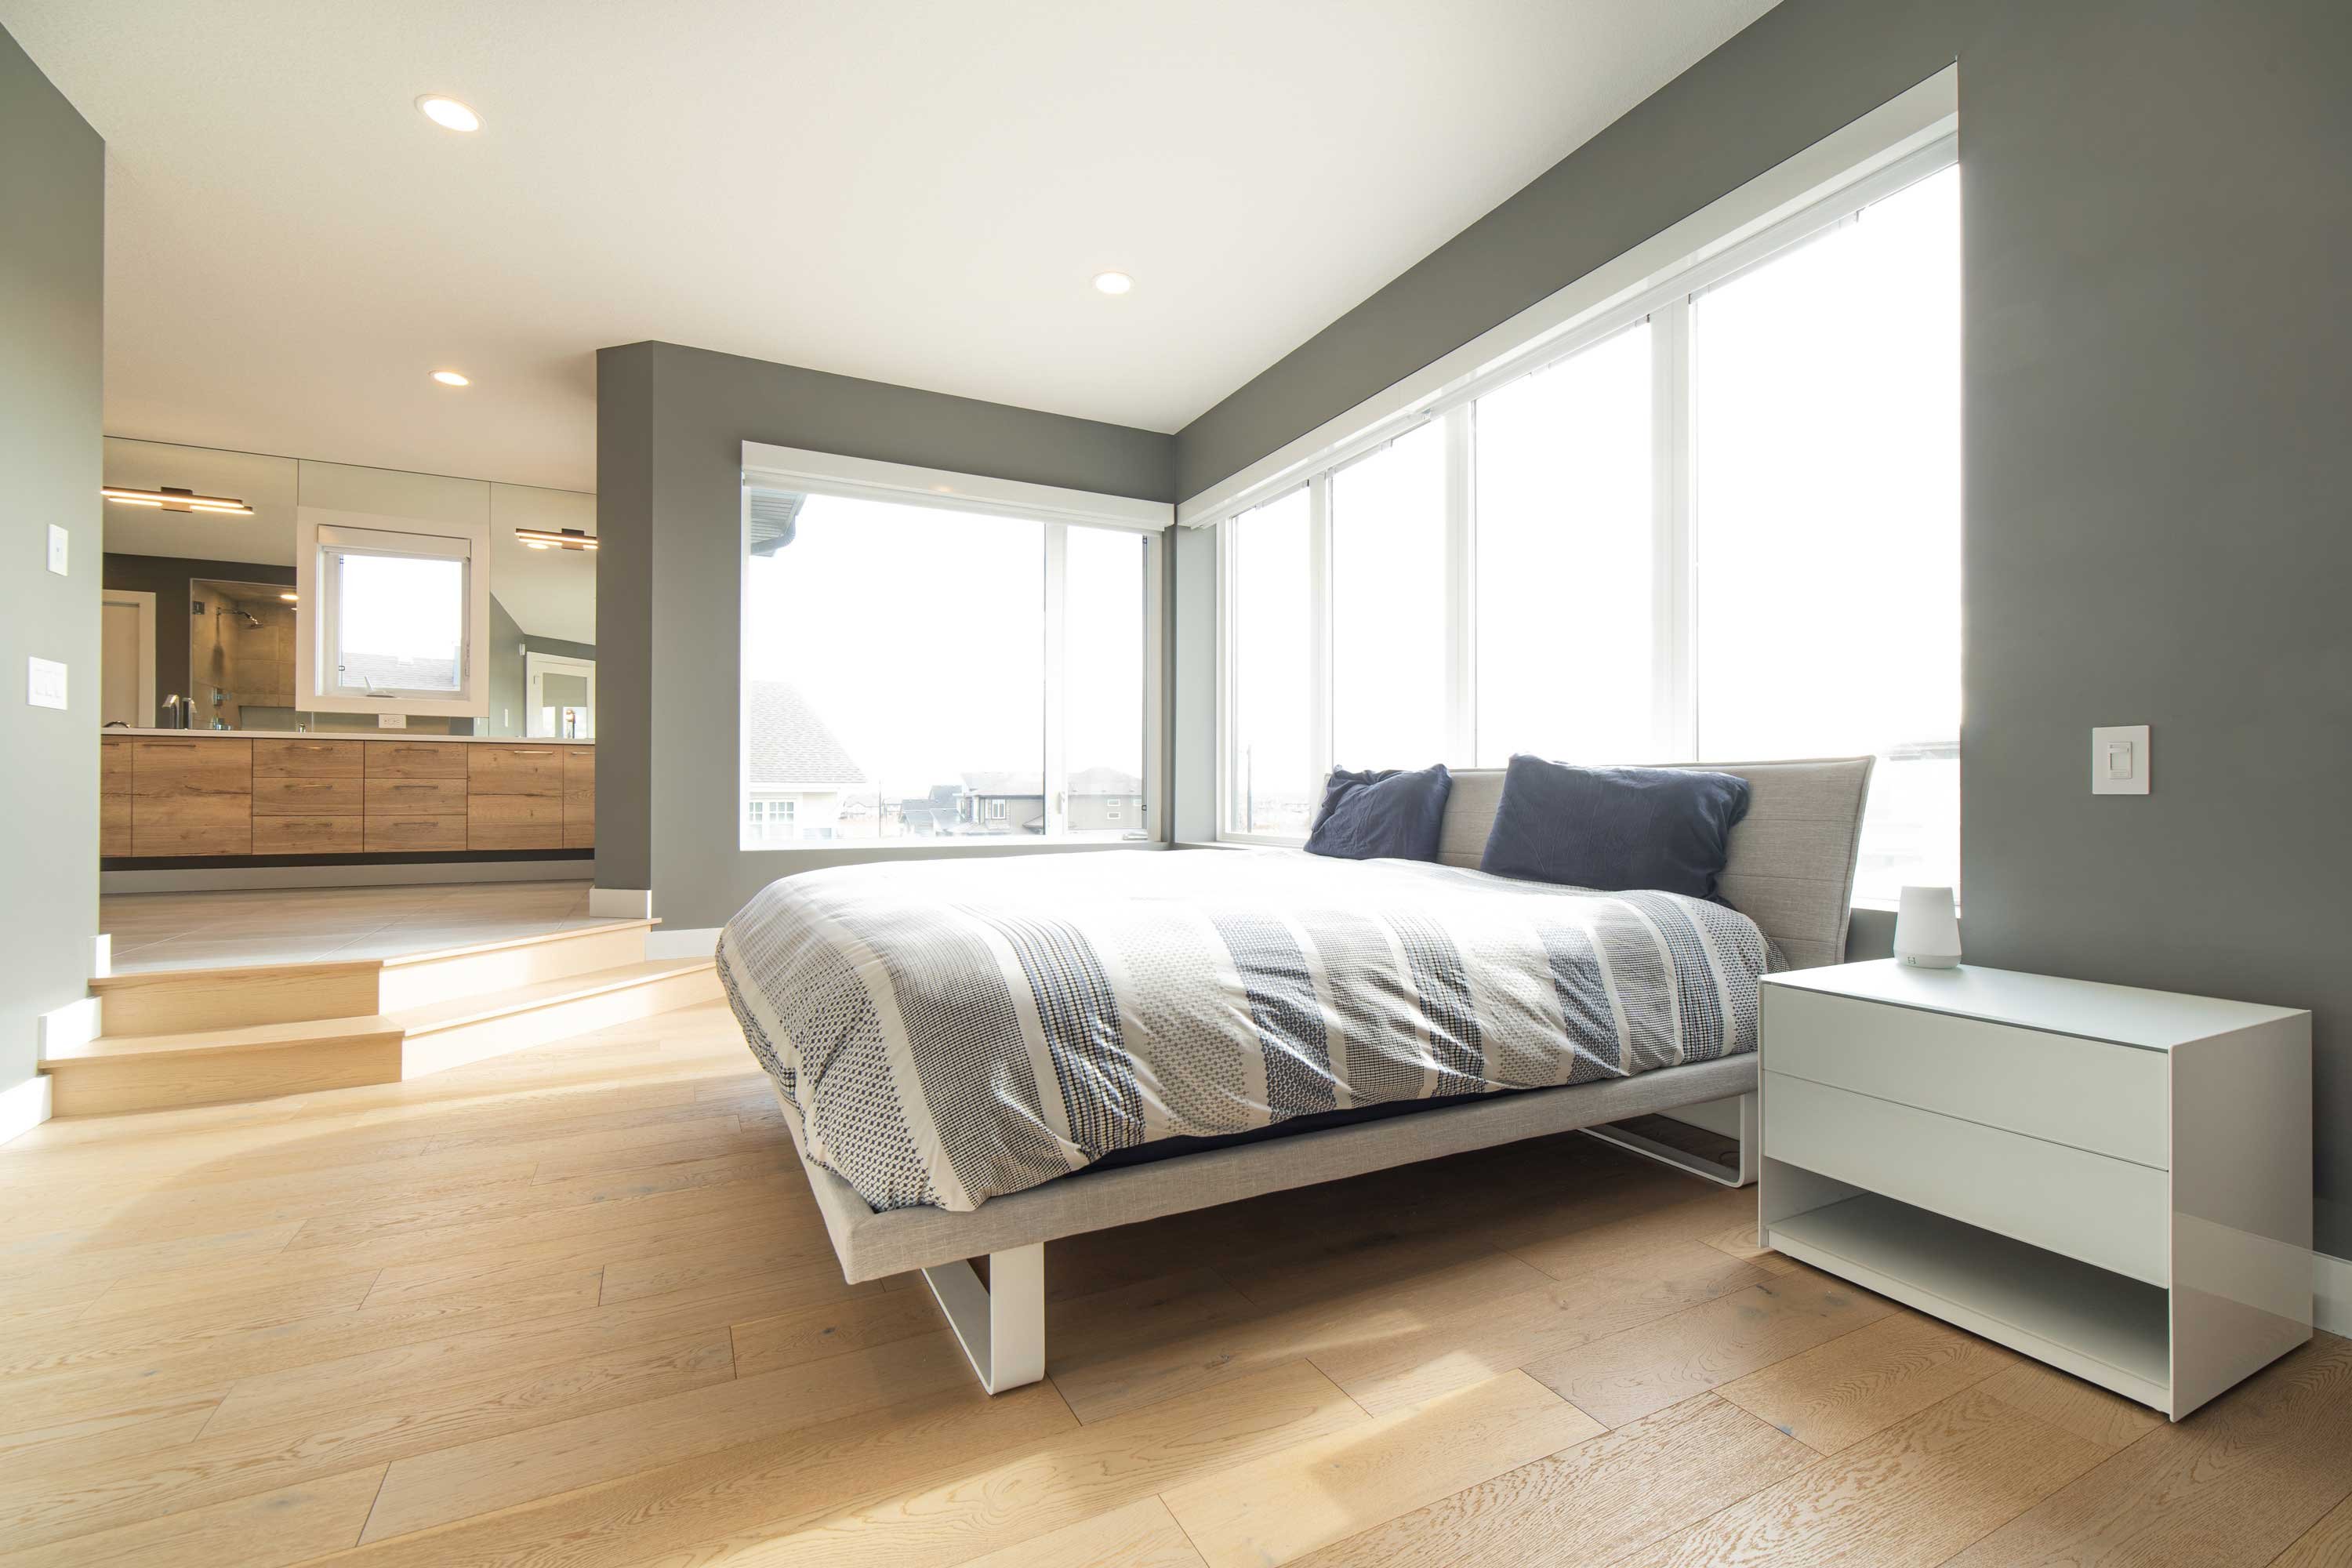 Master bedroom for Kanvi homes built in the new community of Jagare Ridge